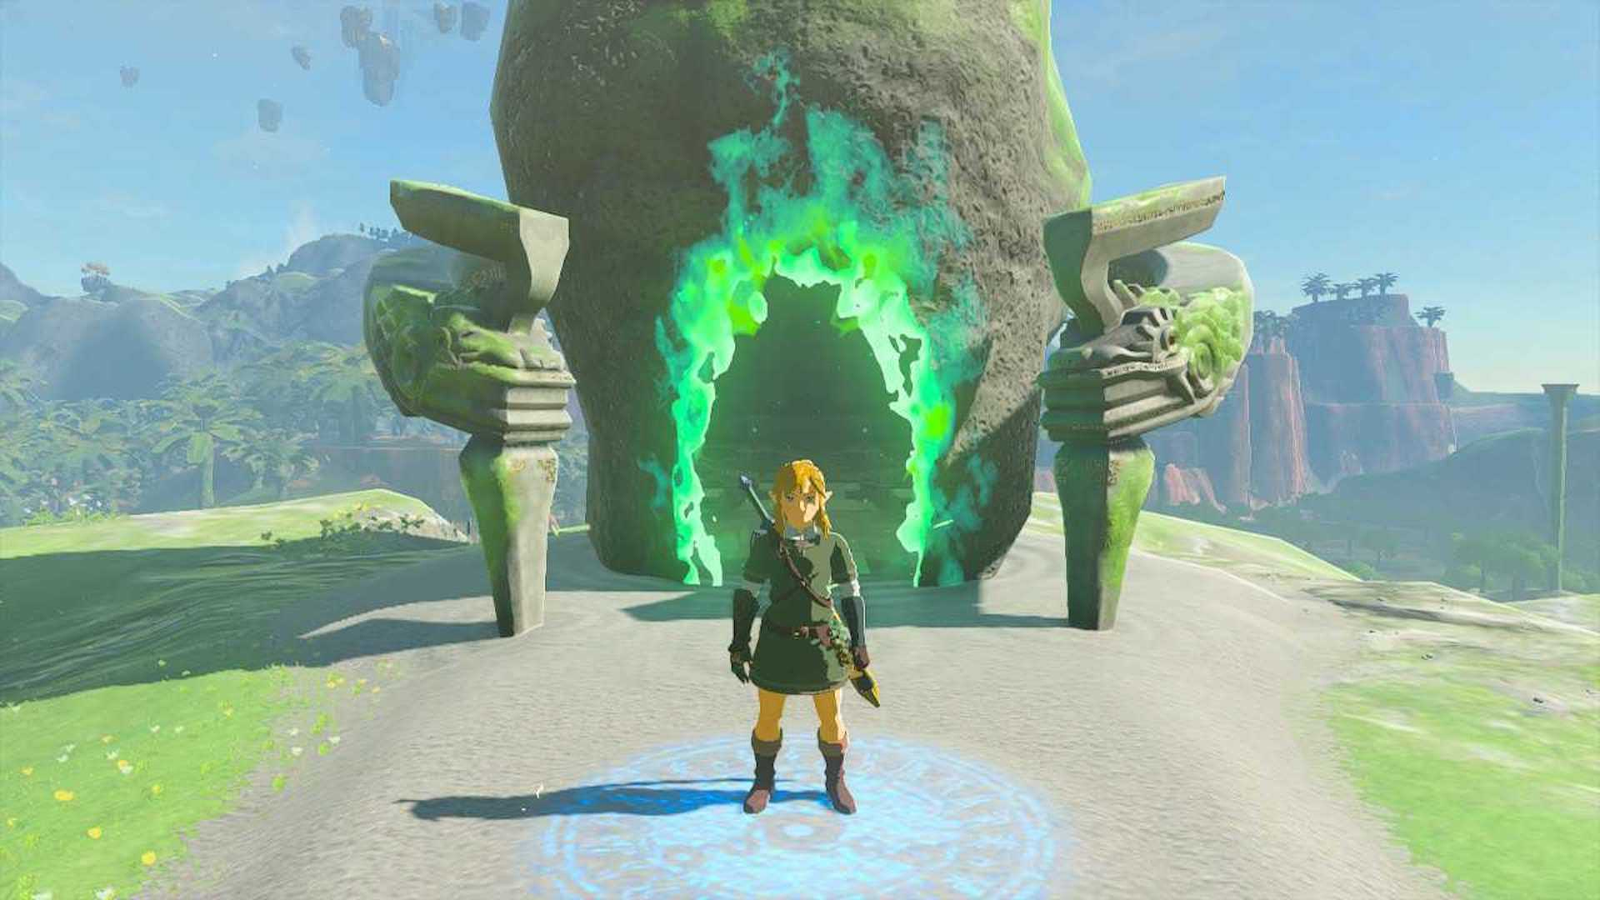 Zelda: Tears of the Kingdom shrines restrict how we play the game - Polygon